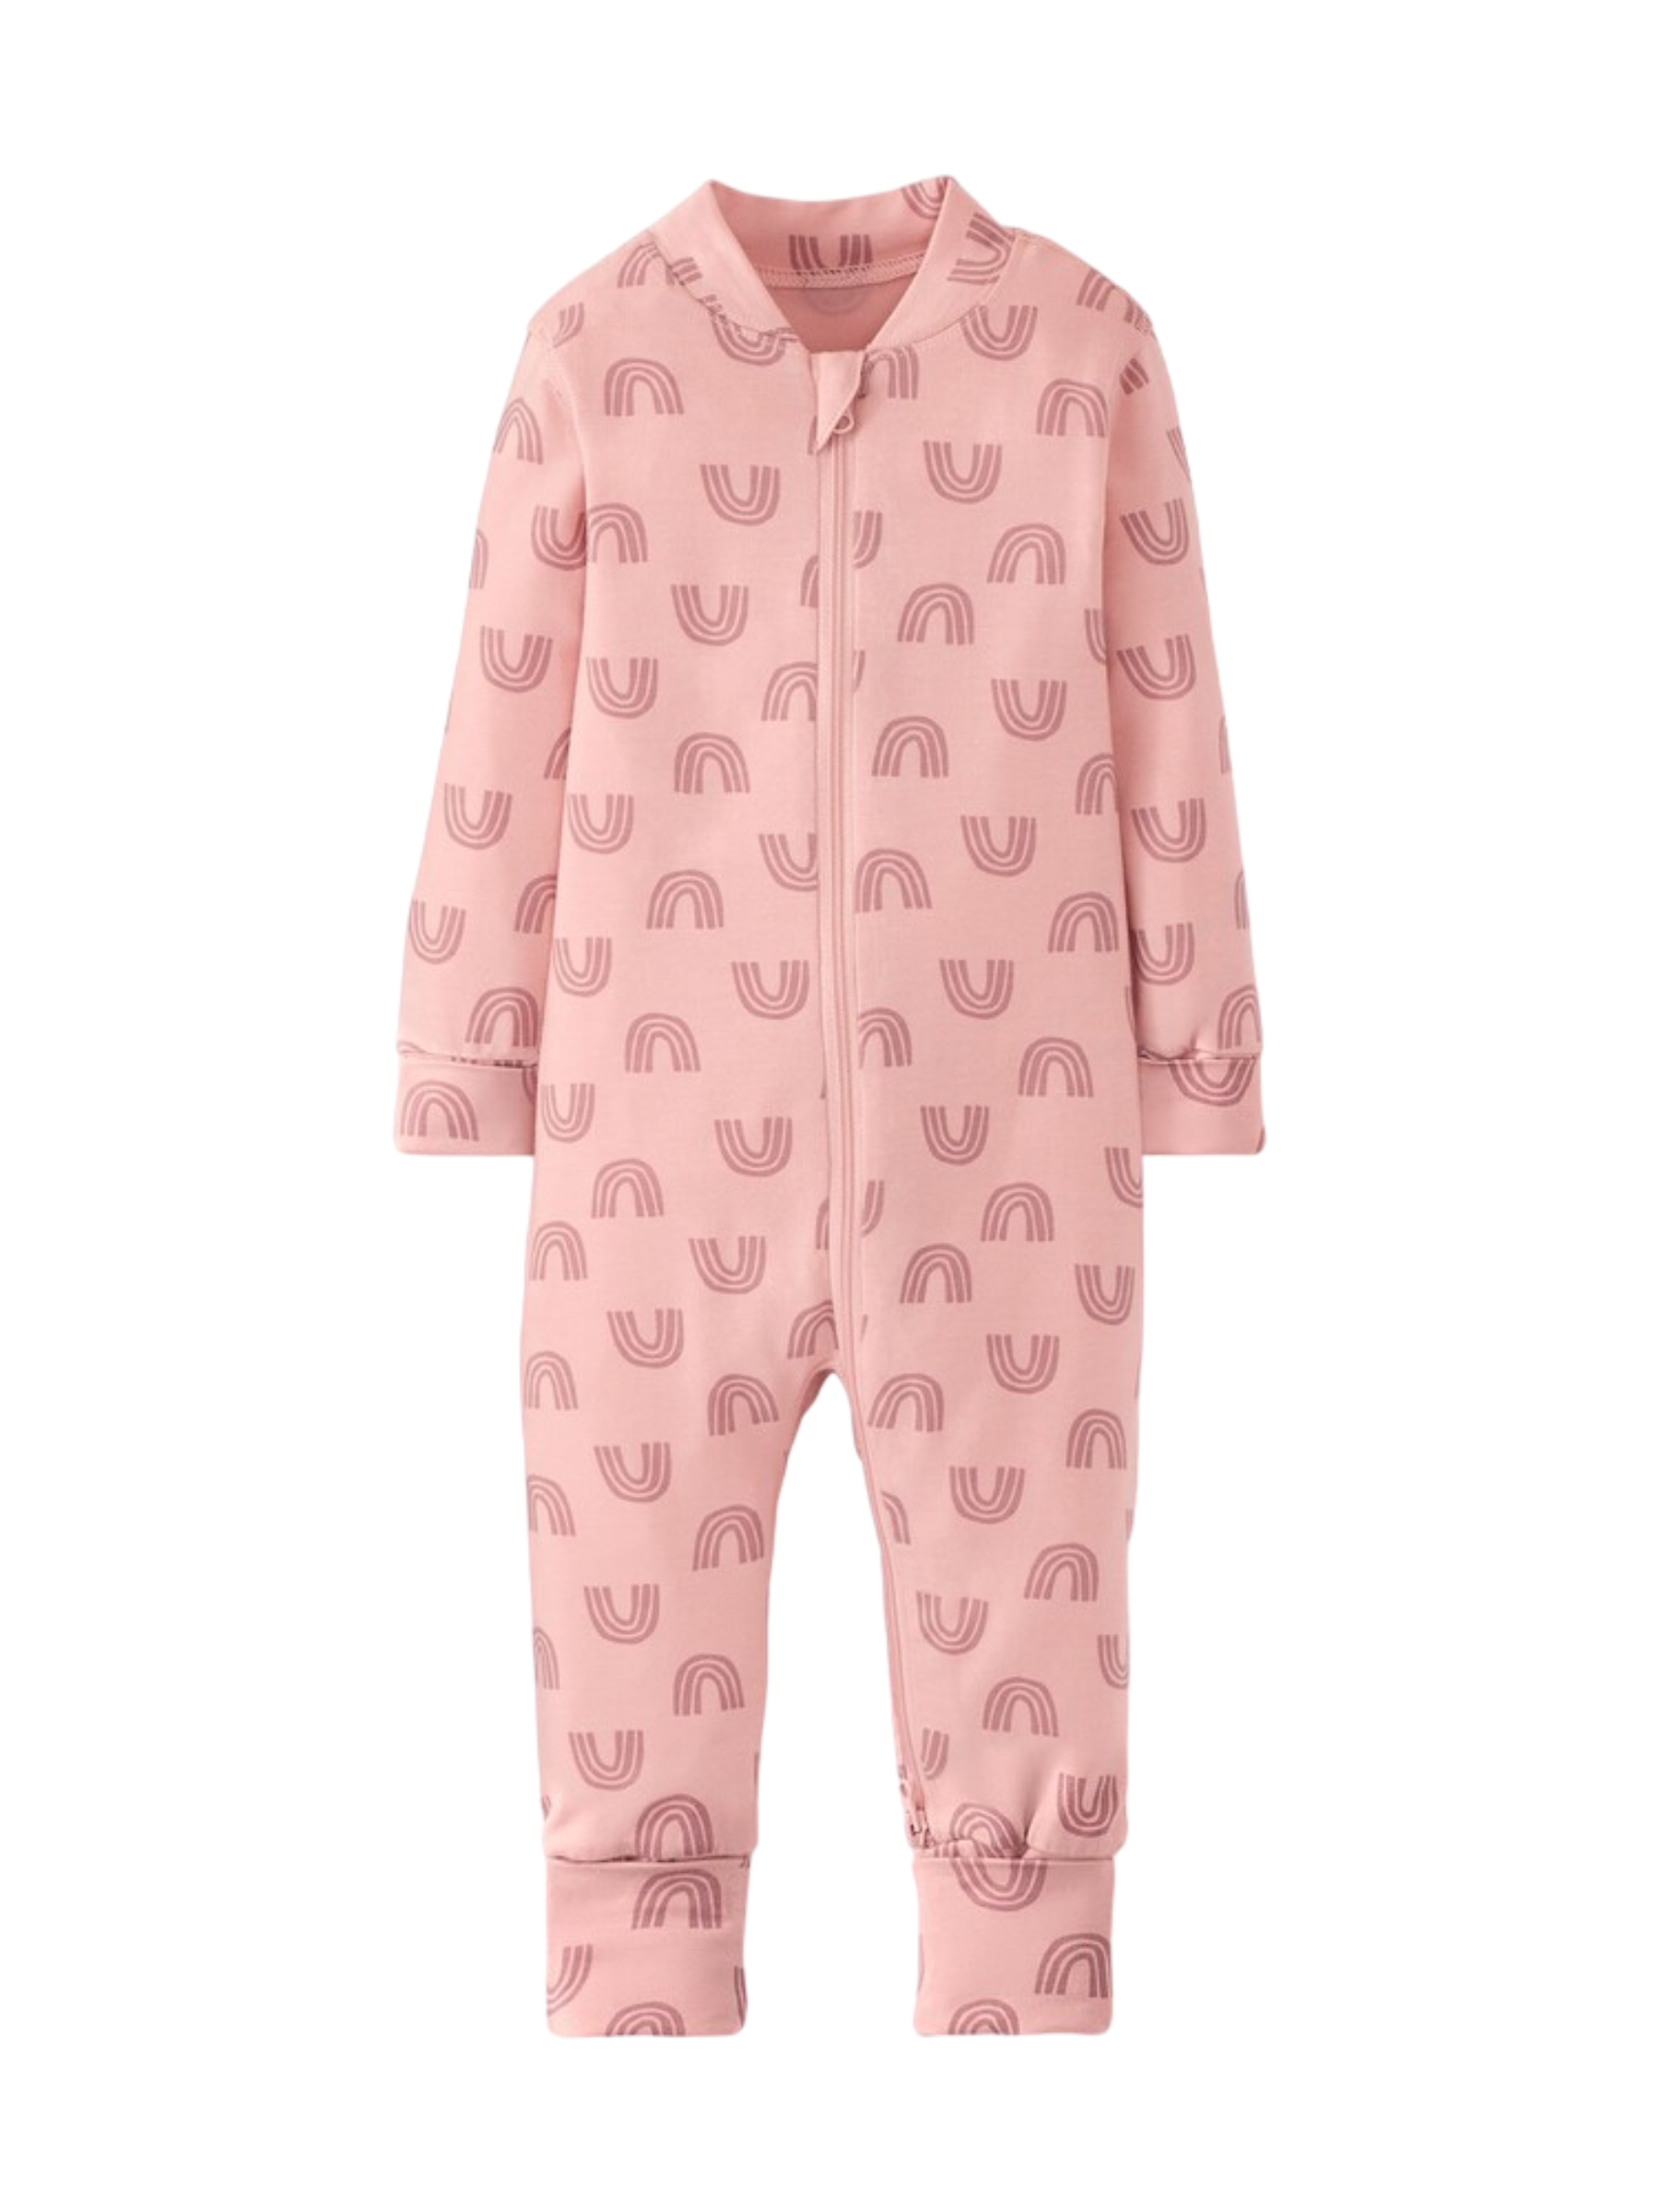 <p>Hanna Andersson just came out with a line of PJs in extra-soft bamboo. The fabric feels luxe and is good for sensitive skin, and no new parent can resist extra PJs.</p> <p><strong>What our expert says:</strong> I'm of the opinion that you can never have too many sleep and play pajamas—it's basically all my kids live in. I particularly love how soft bamboo PJs are. <em>-AM</em></p> $44, Hanna Andersson. <a href="https://www.hannaandersson.com/hannasoft/">Get it now!</a><p>Sign up for today’s biggest stories, from pop culture to politics.</p><a href="https://www.glamour.com/newsletter/news?sourceCode=msnsend">Sign Up</a>